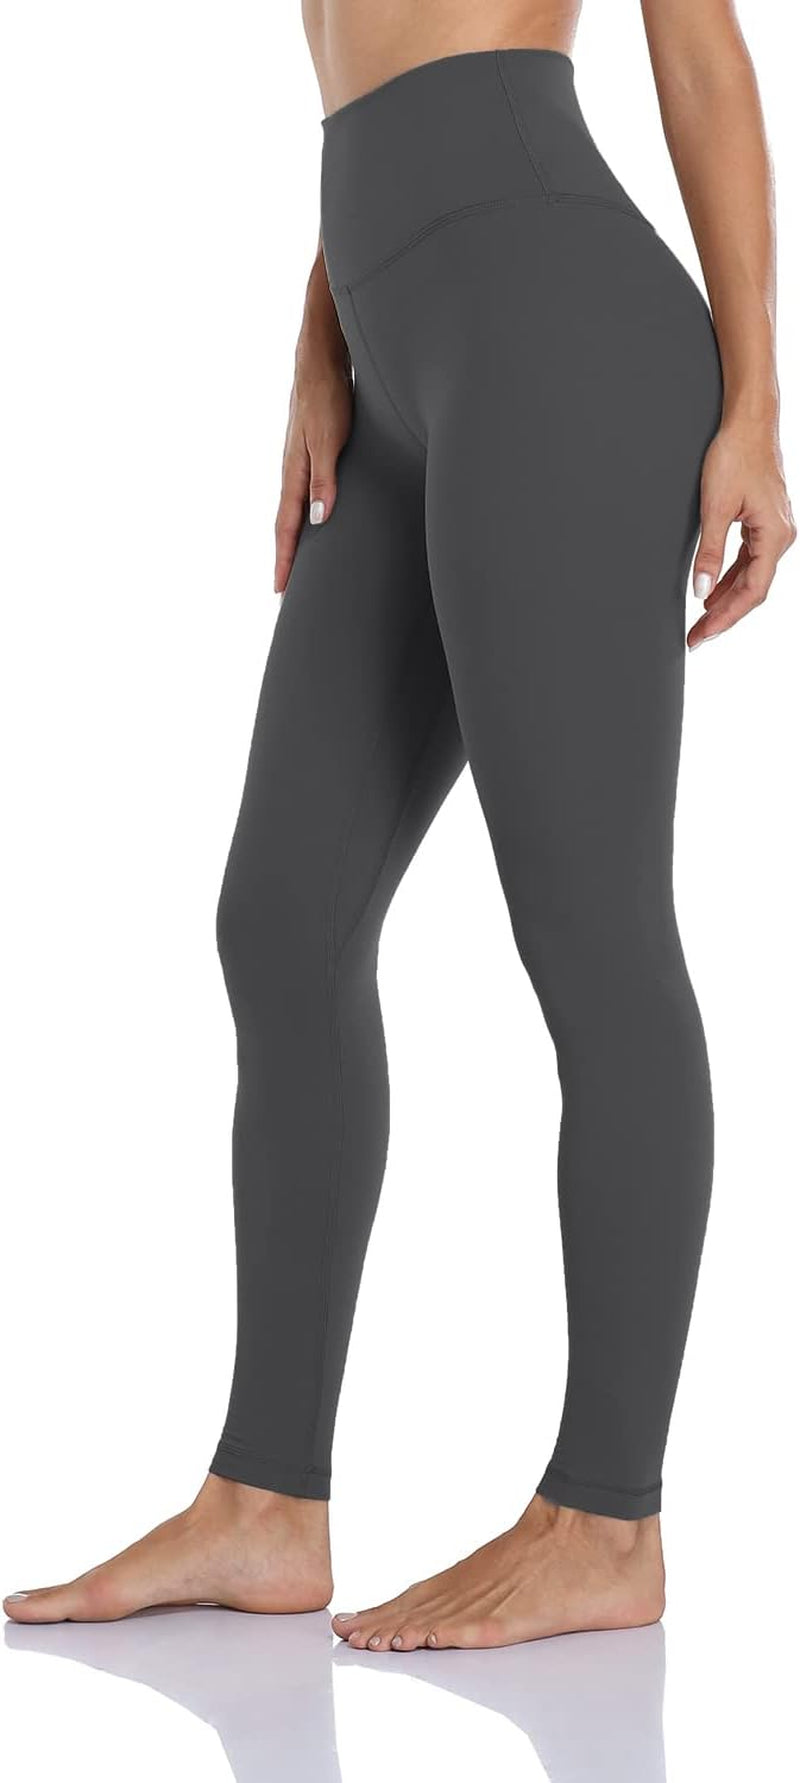 Essential/Workout Pro/Yoga Pro Full Length Yoga Leggings, Women'S High Waisted Workout Compression Pants 28''